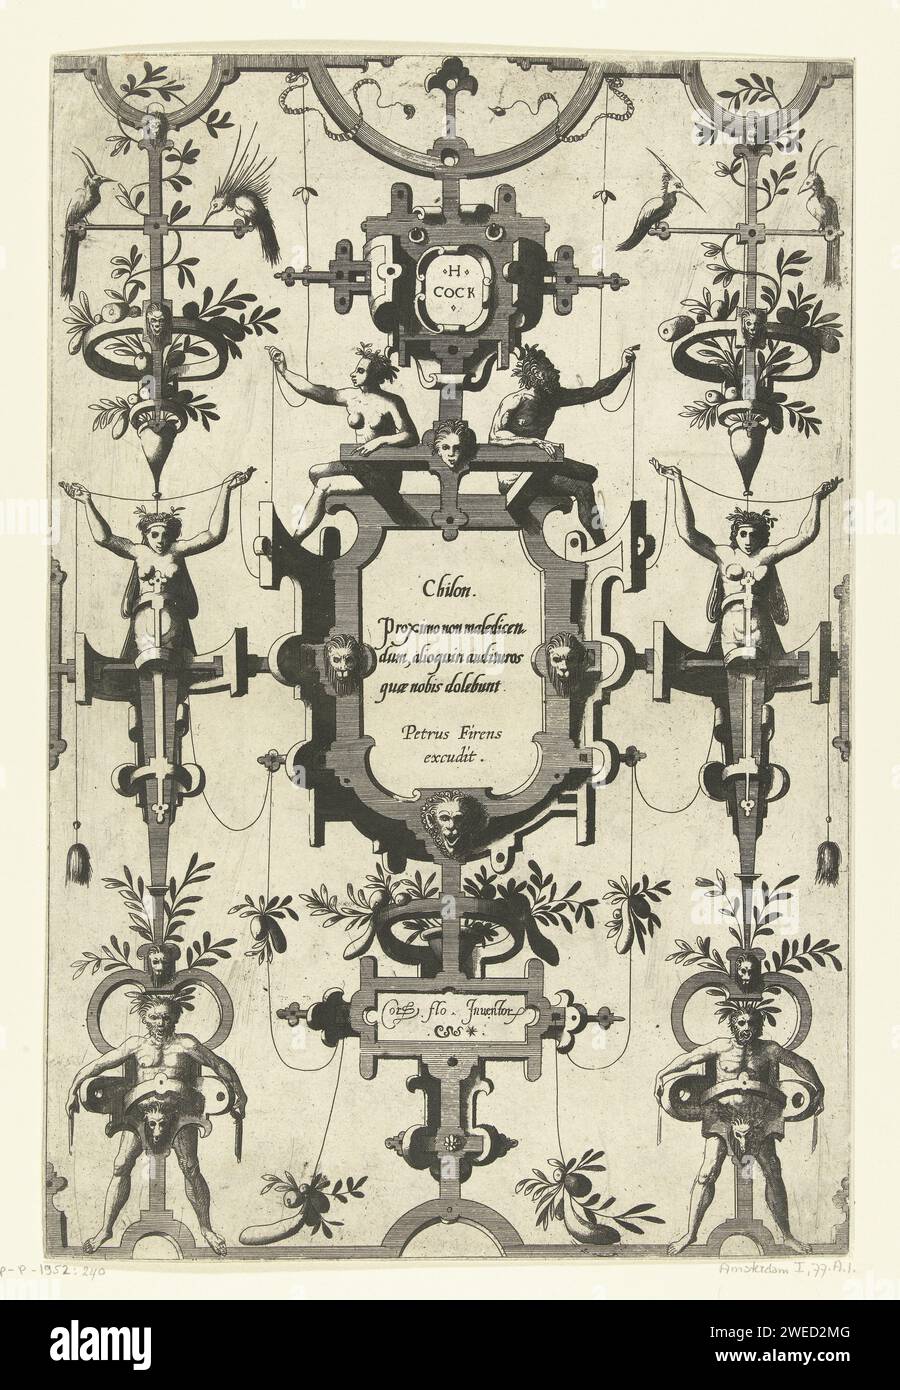 Cartouche with text by Chilo, Johannes or Lucas van Doetechum, after Cornelis Floris (II), c. 1600 - c. 1625 print Cartouche with text by Chilo between two candelabers, made up of rolling with a sater, a Herme and a vase with flowers. One of 4 magazines from a series of 6. Second edition of a series of flat decorations designed by Cornelis Floris (Orn Cat I-77.1 to 77.6). Netherlands (possibly) paper etching Stock Photo